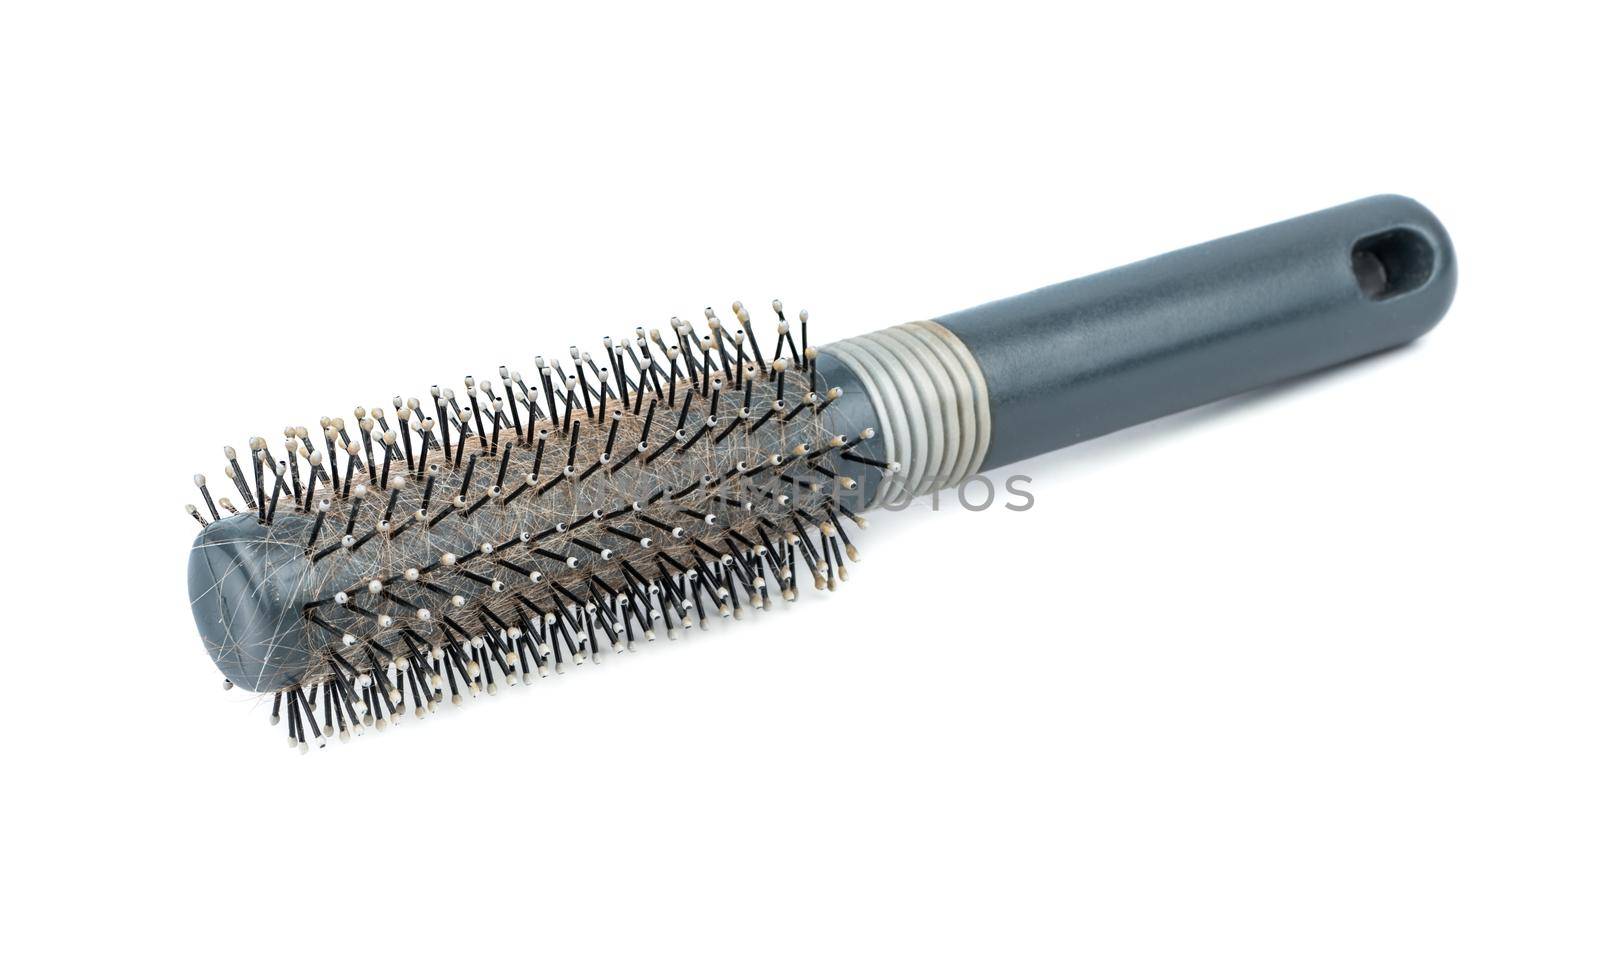 The old used to comb the hair on a white background